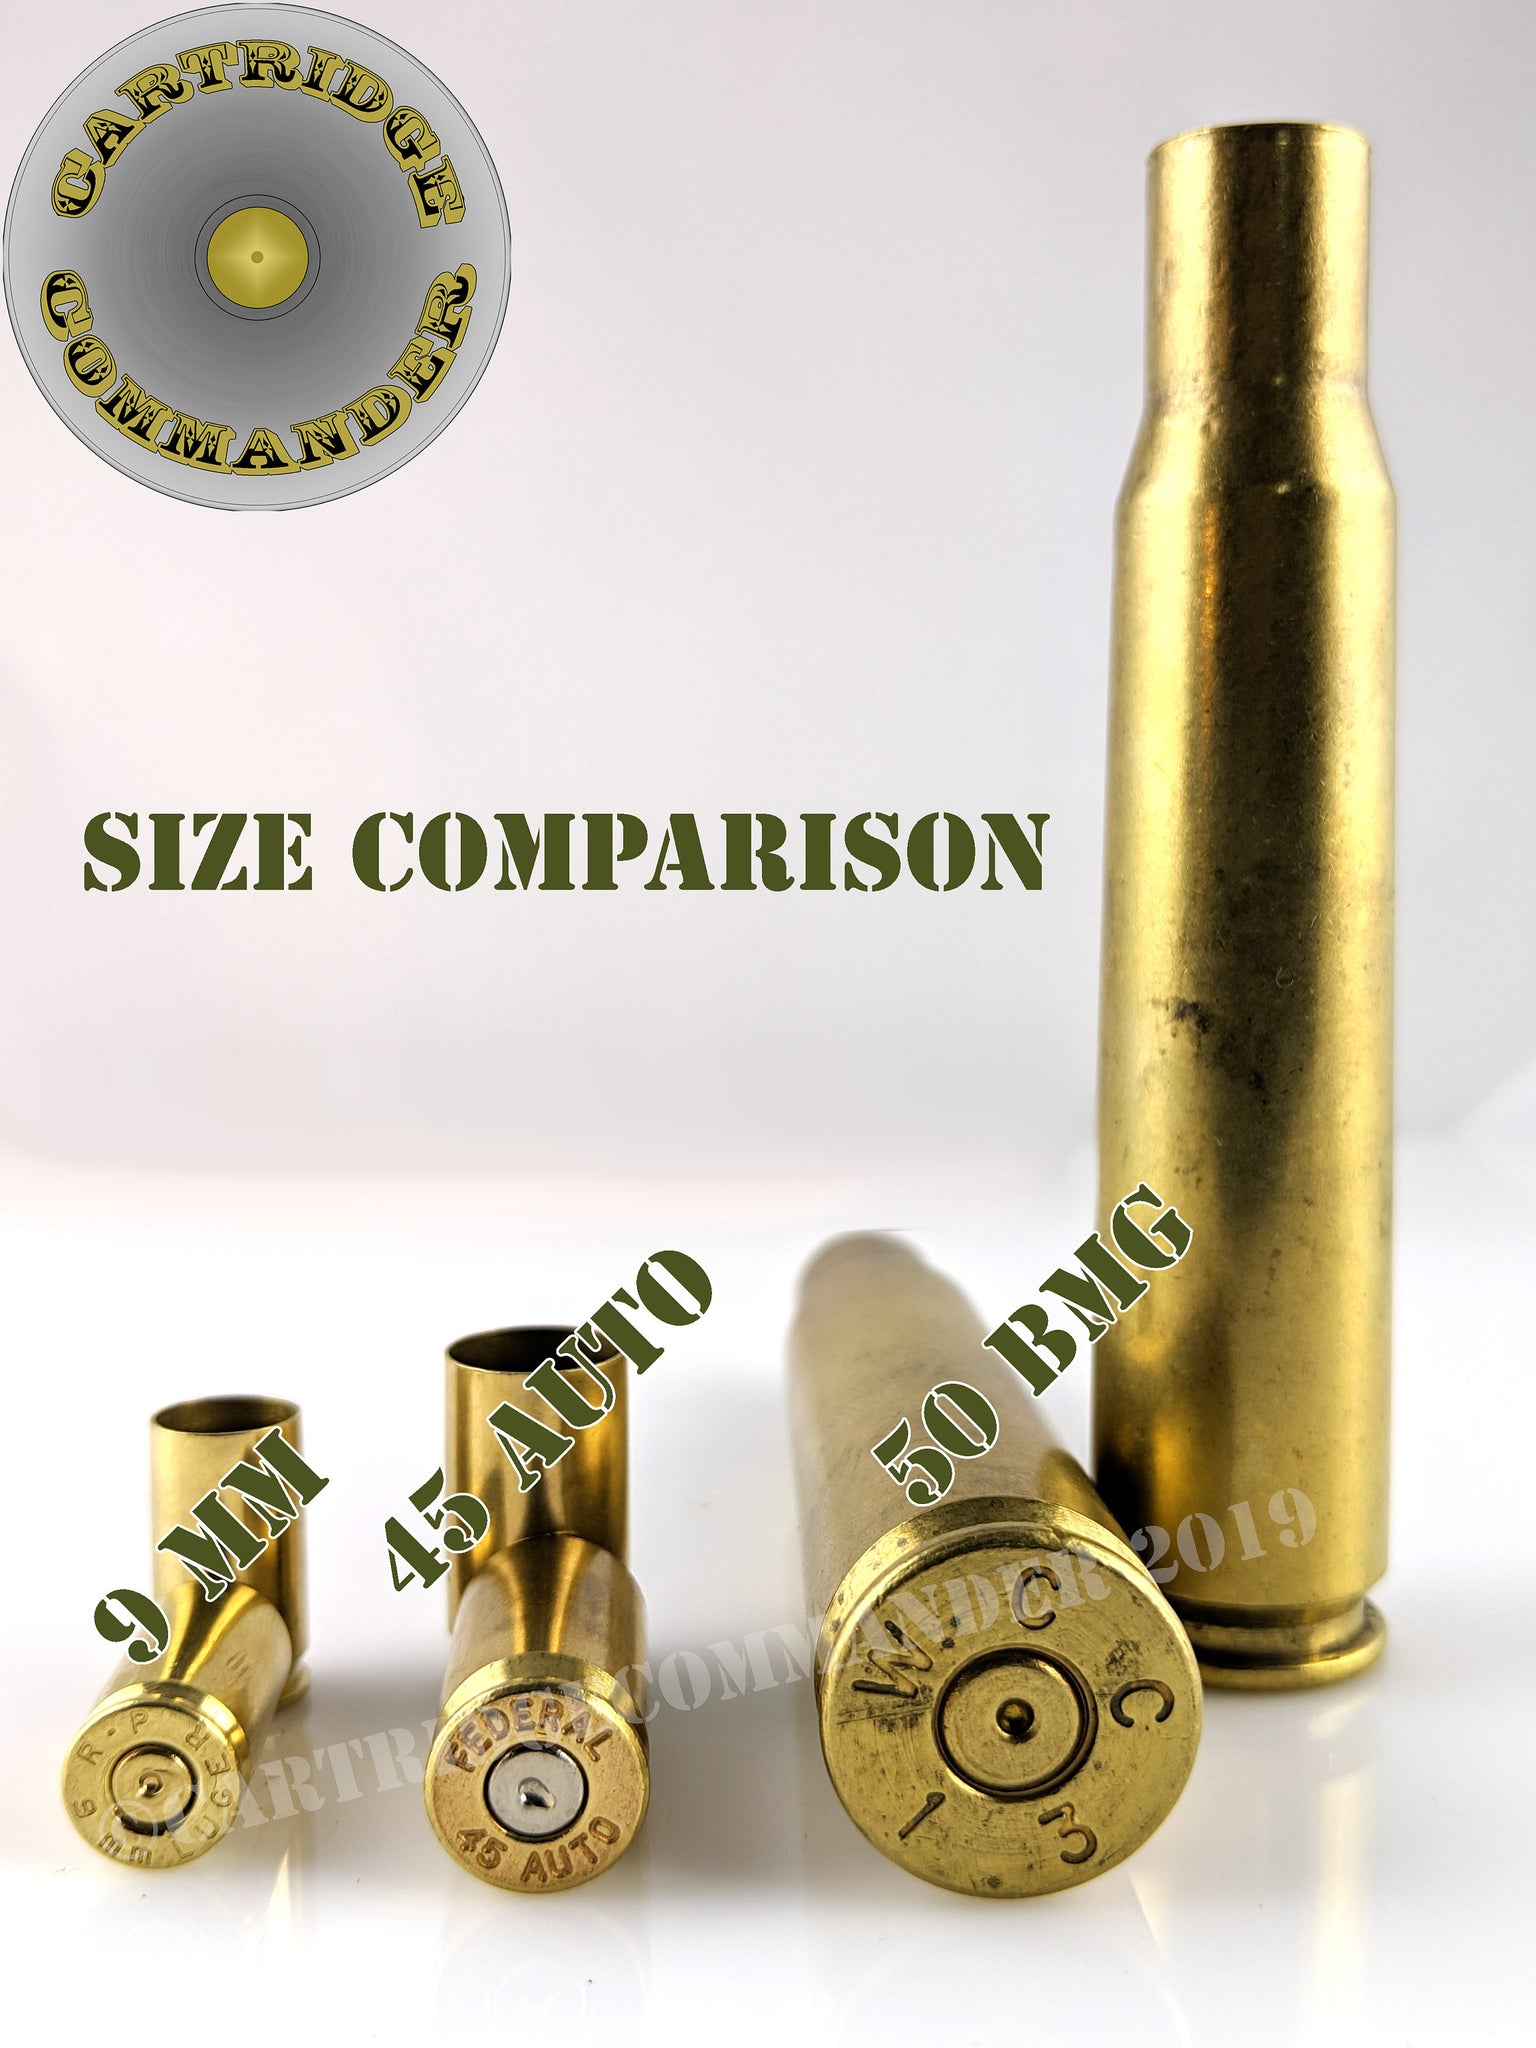 50 BMG brass thincut bullet slices, mix mfg, 25-pack – Cartridge Commander